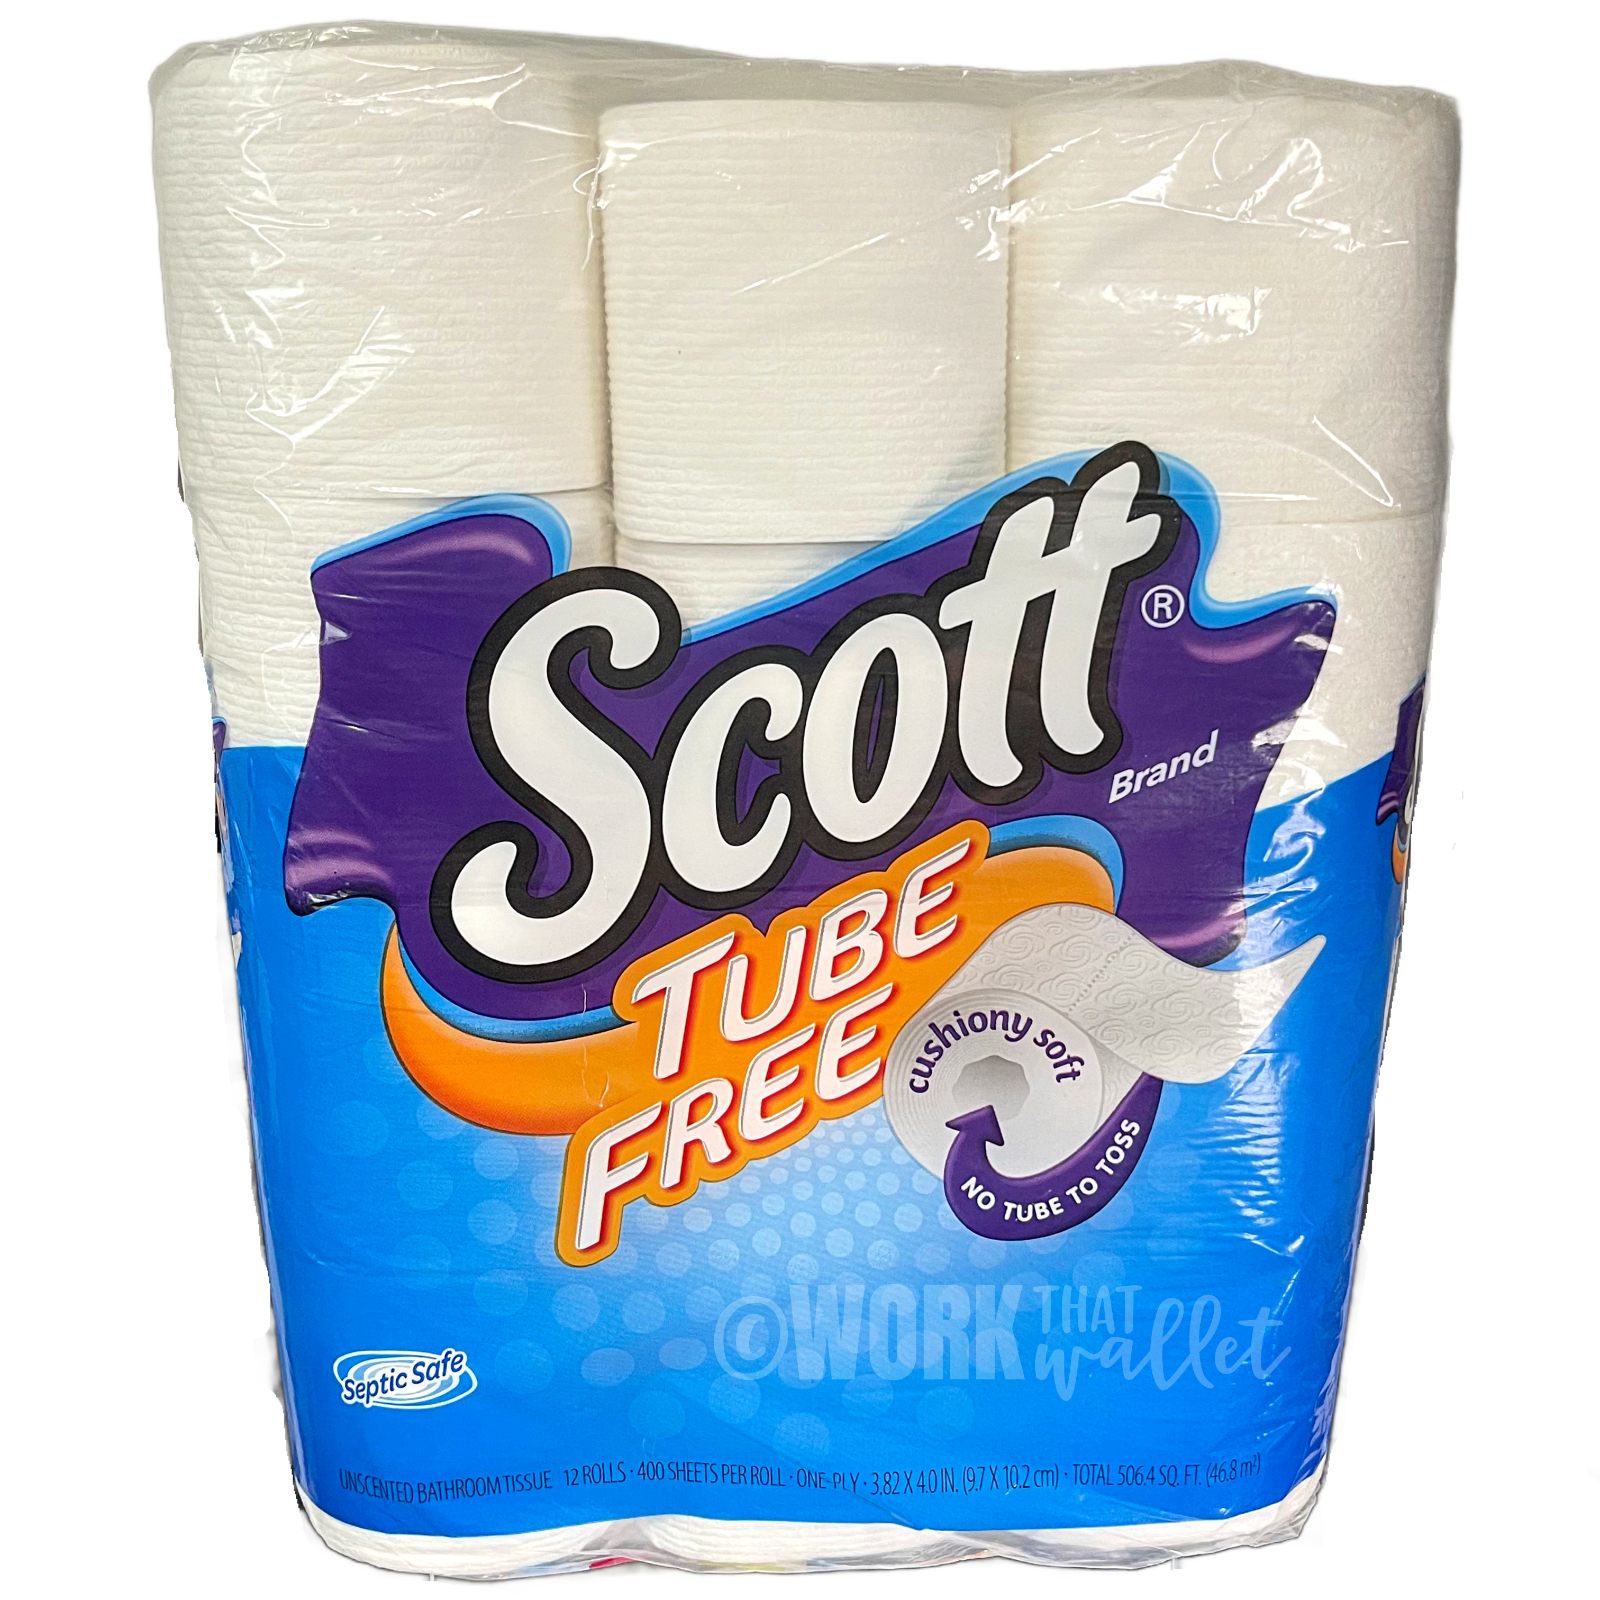 Primary image for [1] 12 Roll Package Scott Tube Free "Septic Safe" Toilet Paper - DISCONTINUED